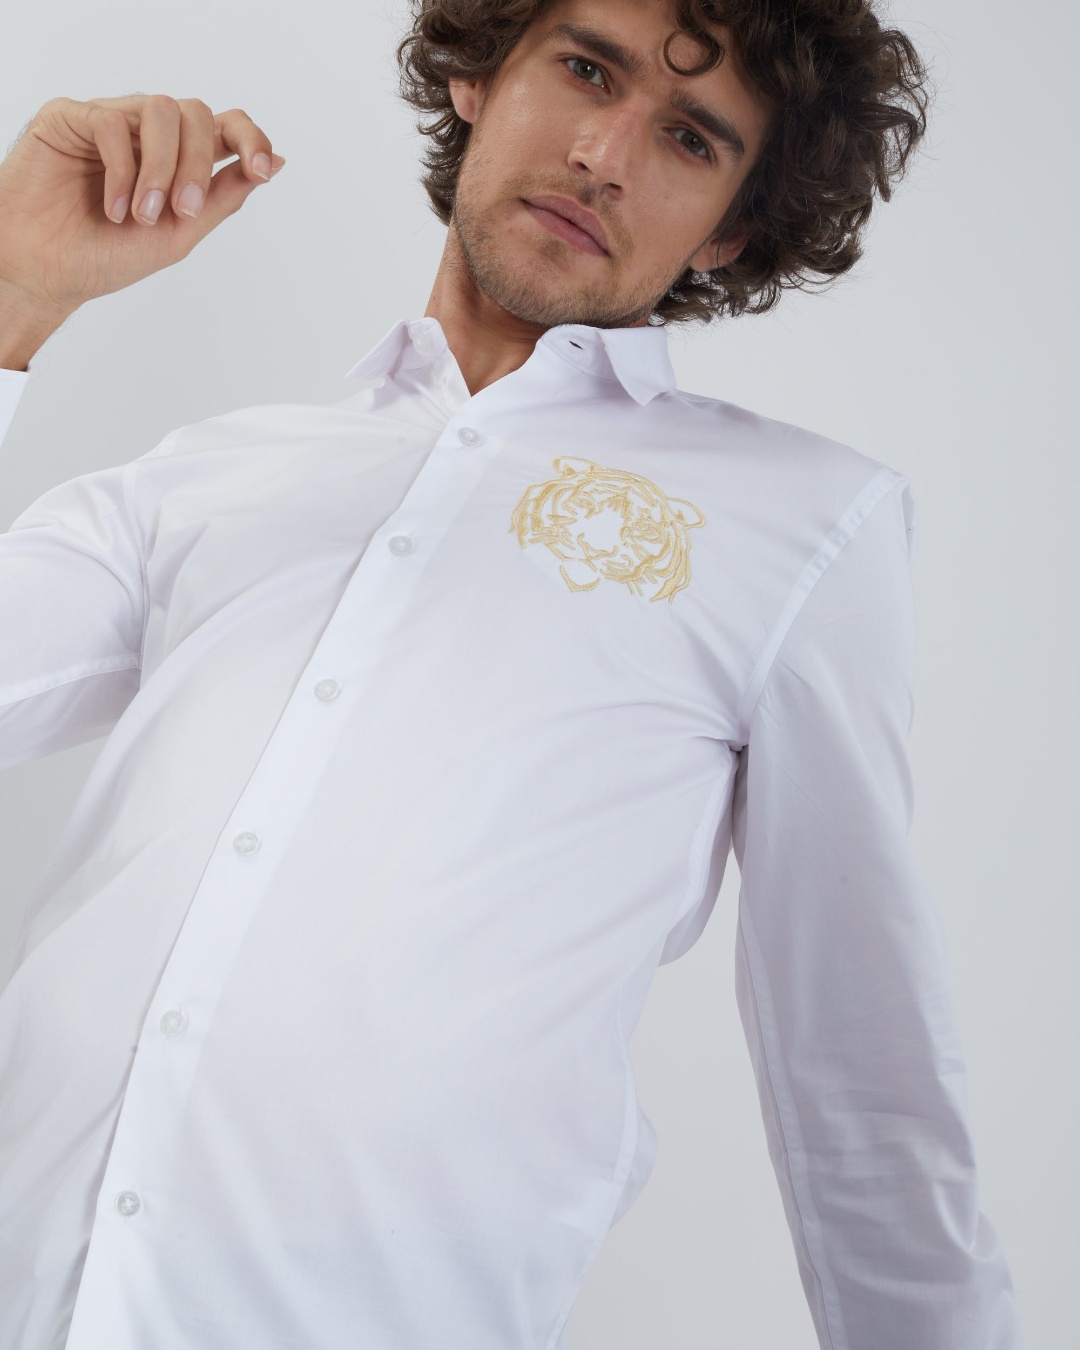 Shop Men's White Embroidered Slim Fit Shirt